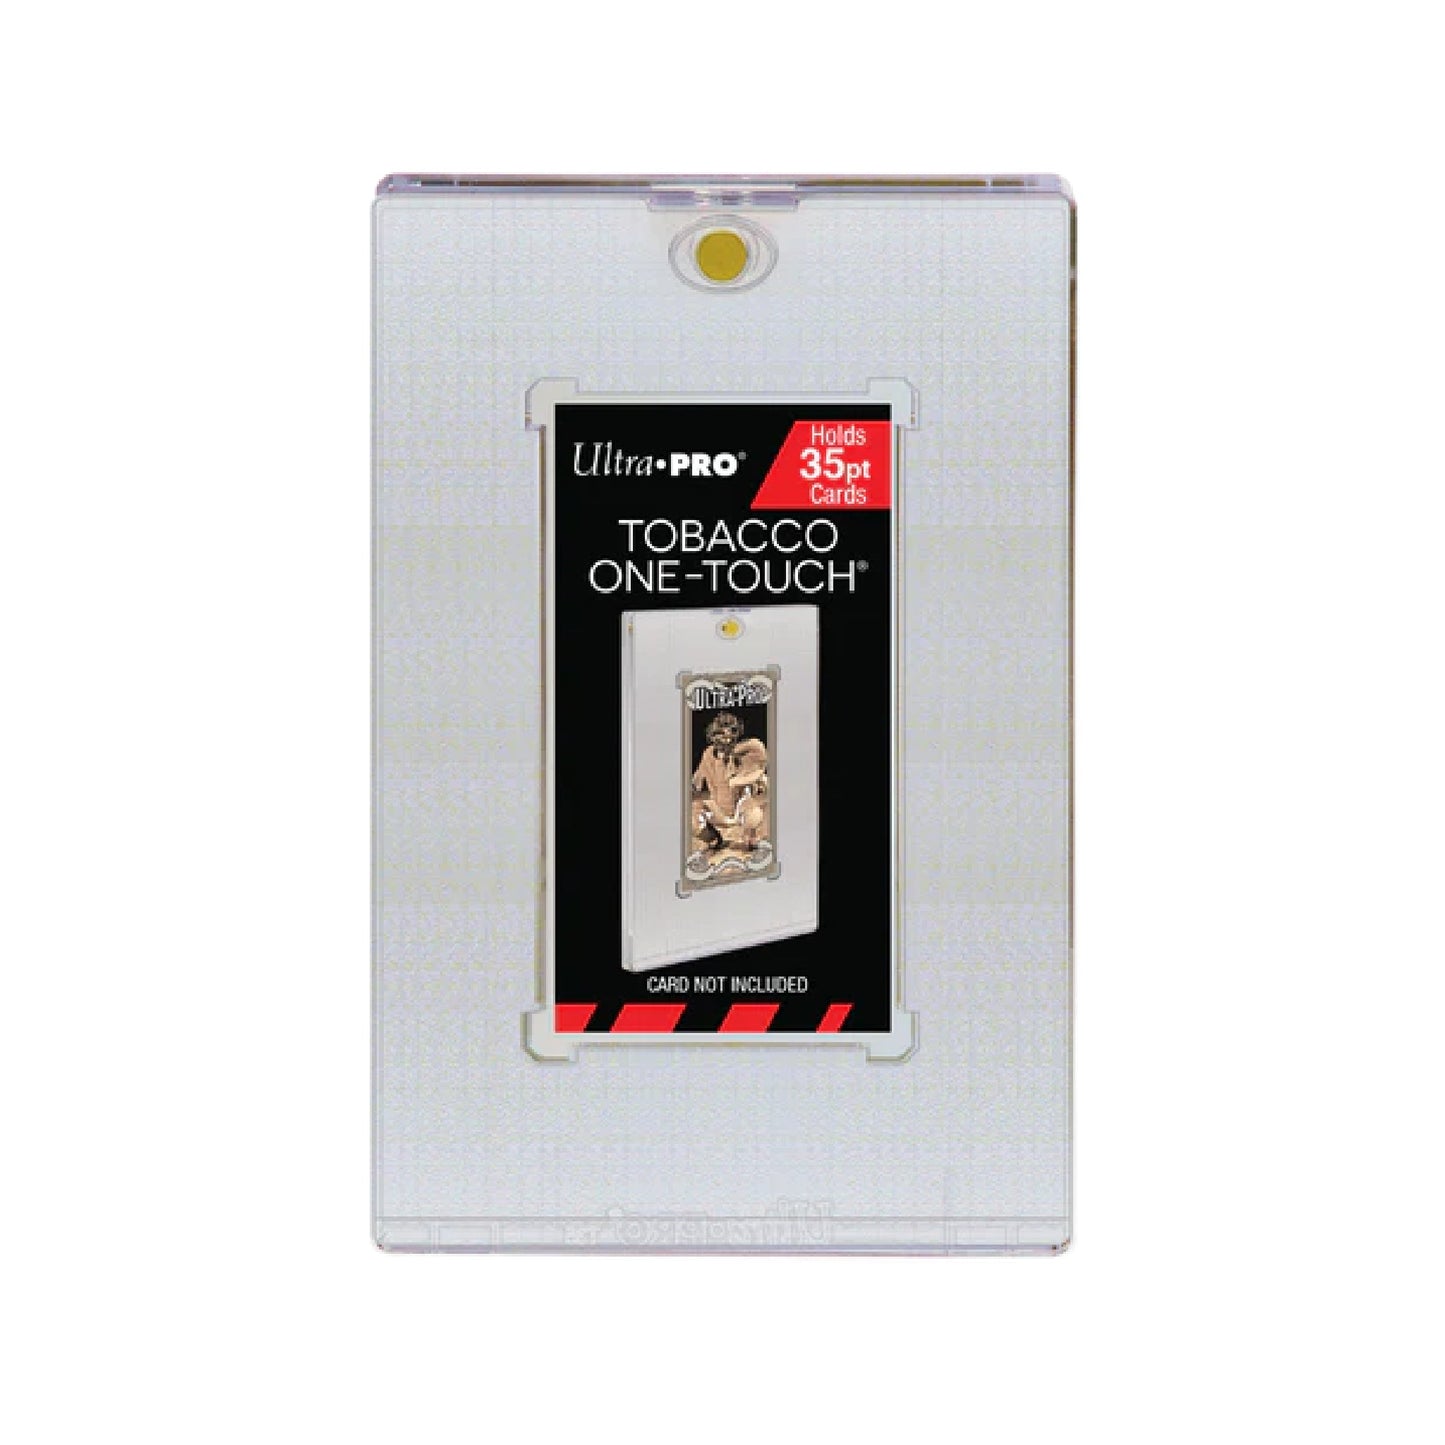 Ultra Pro Tobacco Card One Touch